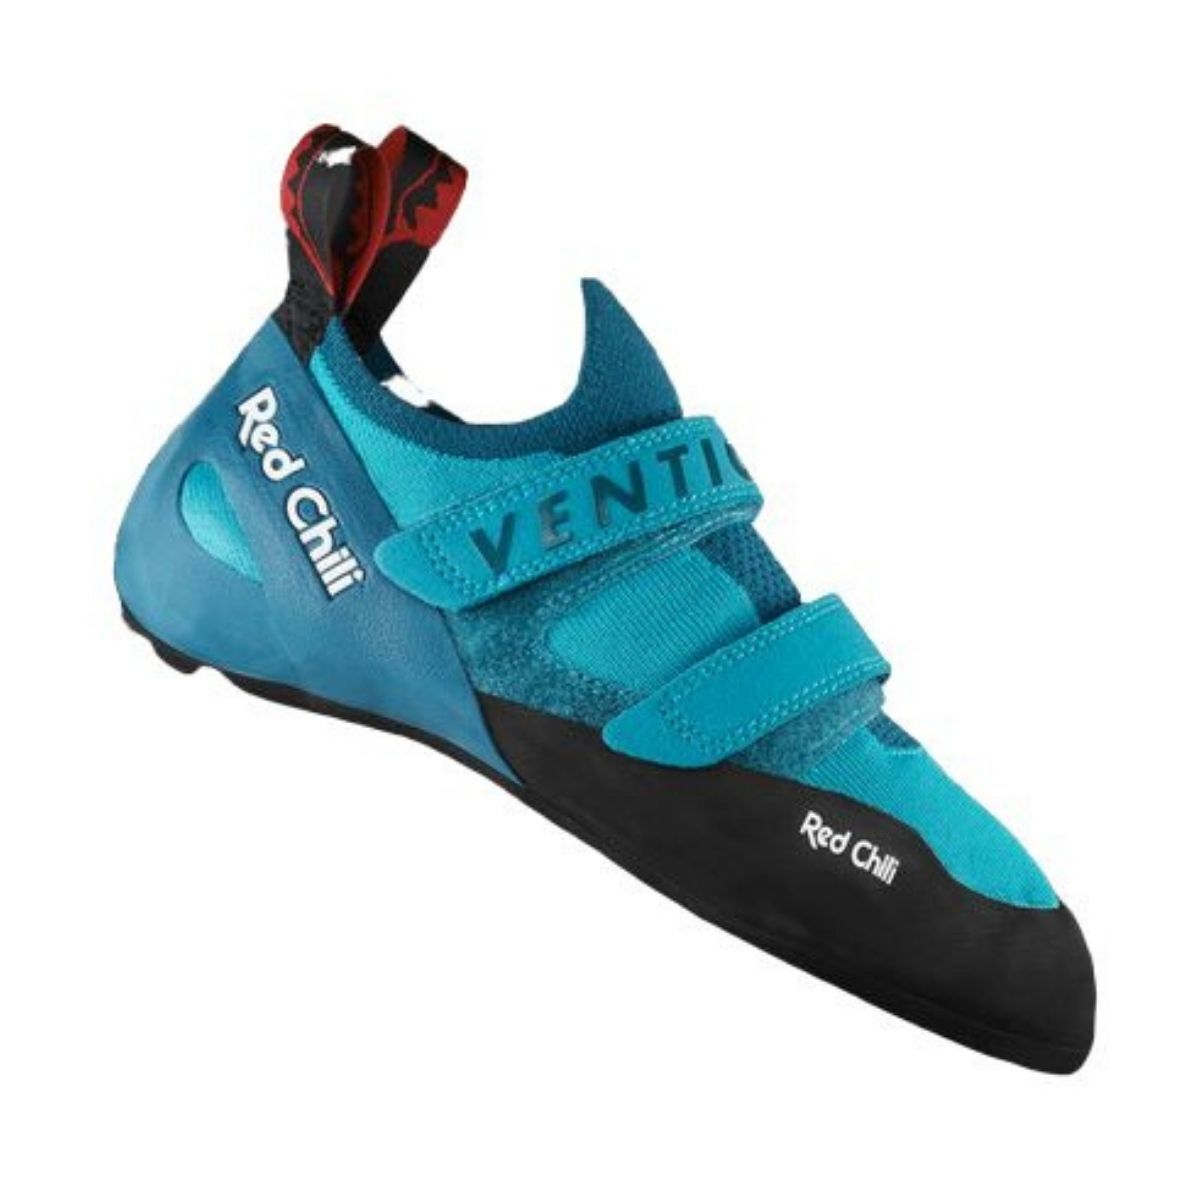 Red Chili Ventic Air  - Climbing shoes